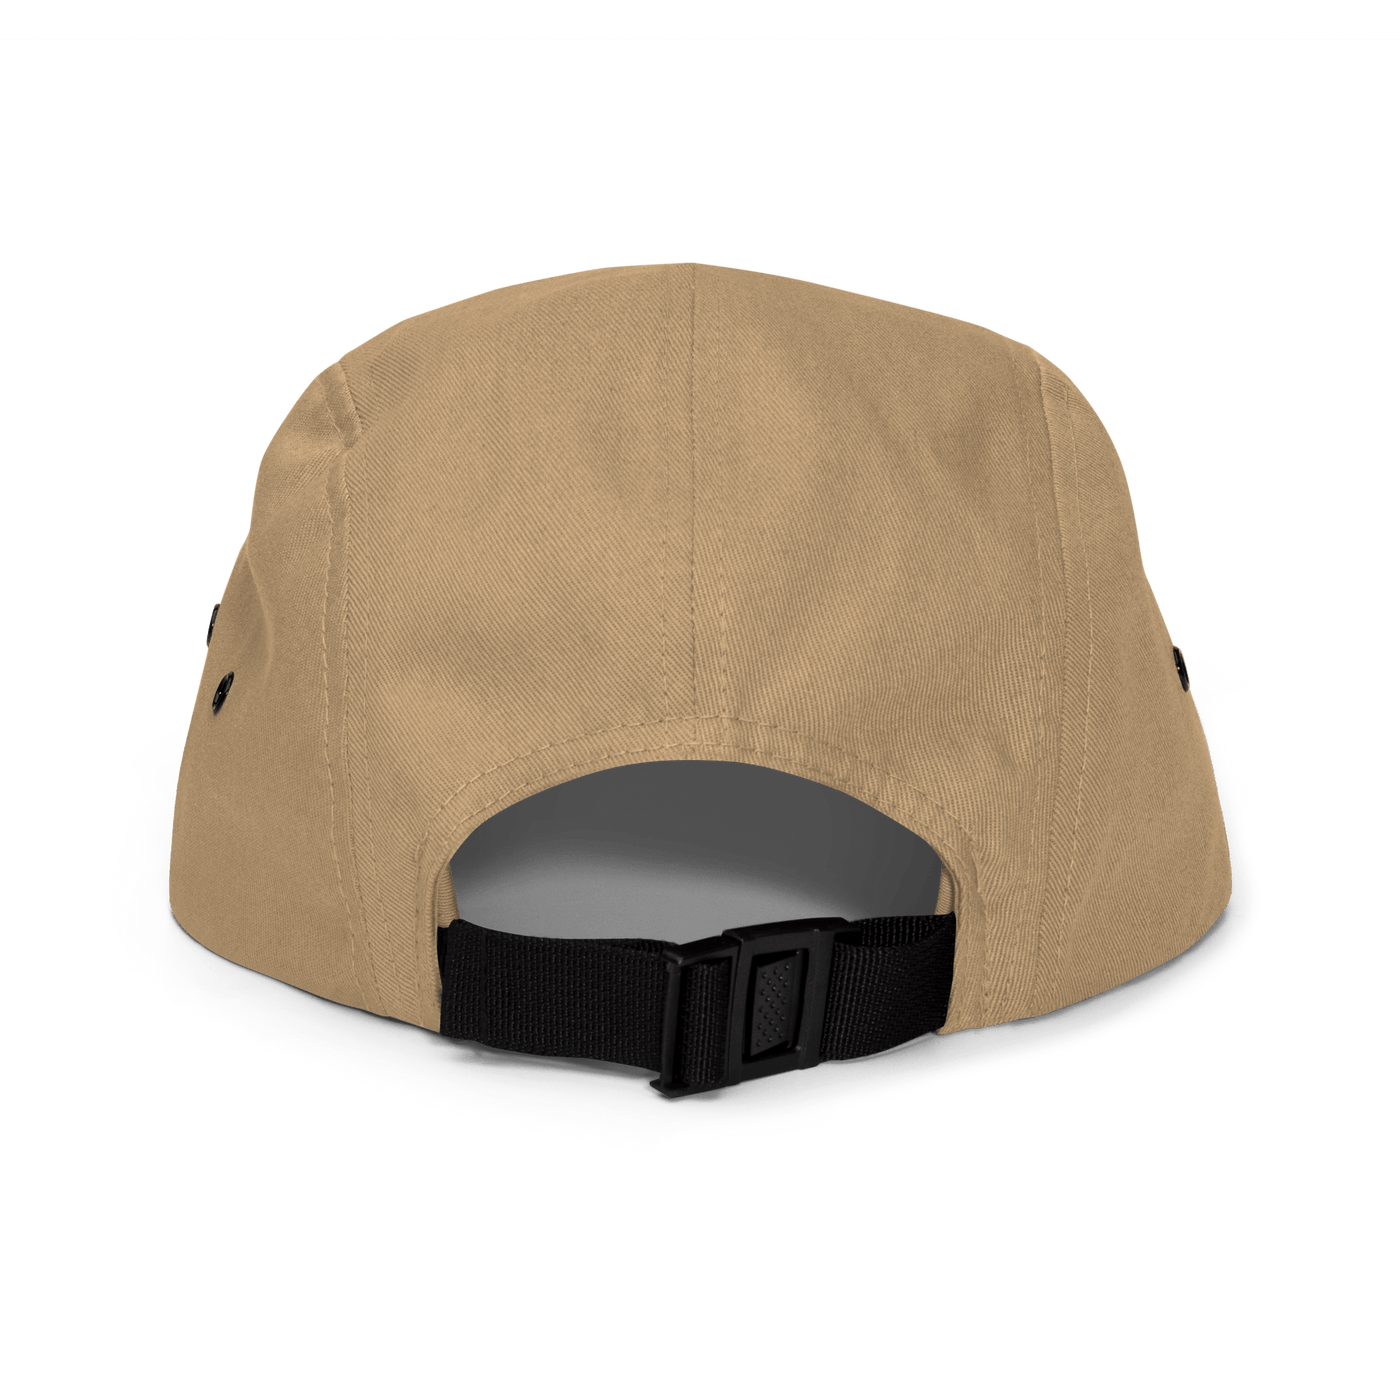 Tired Mom Five Panel Hat - Khaki - - Just Another Cap Store